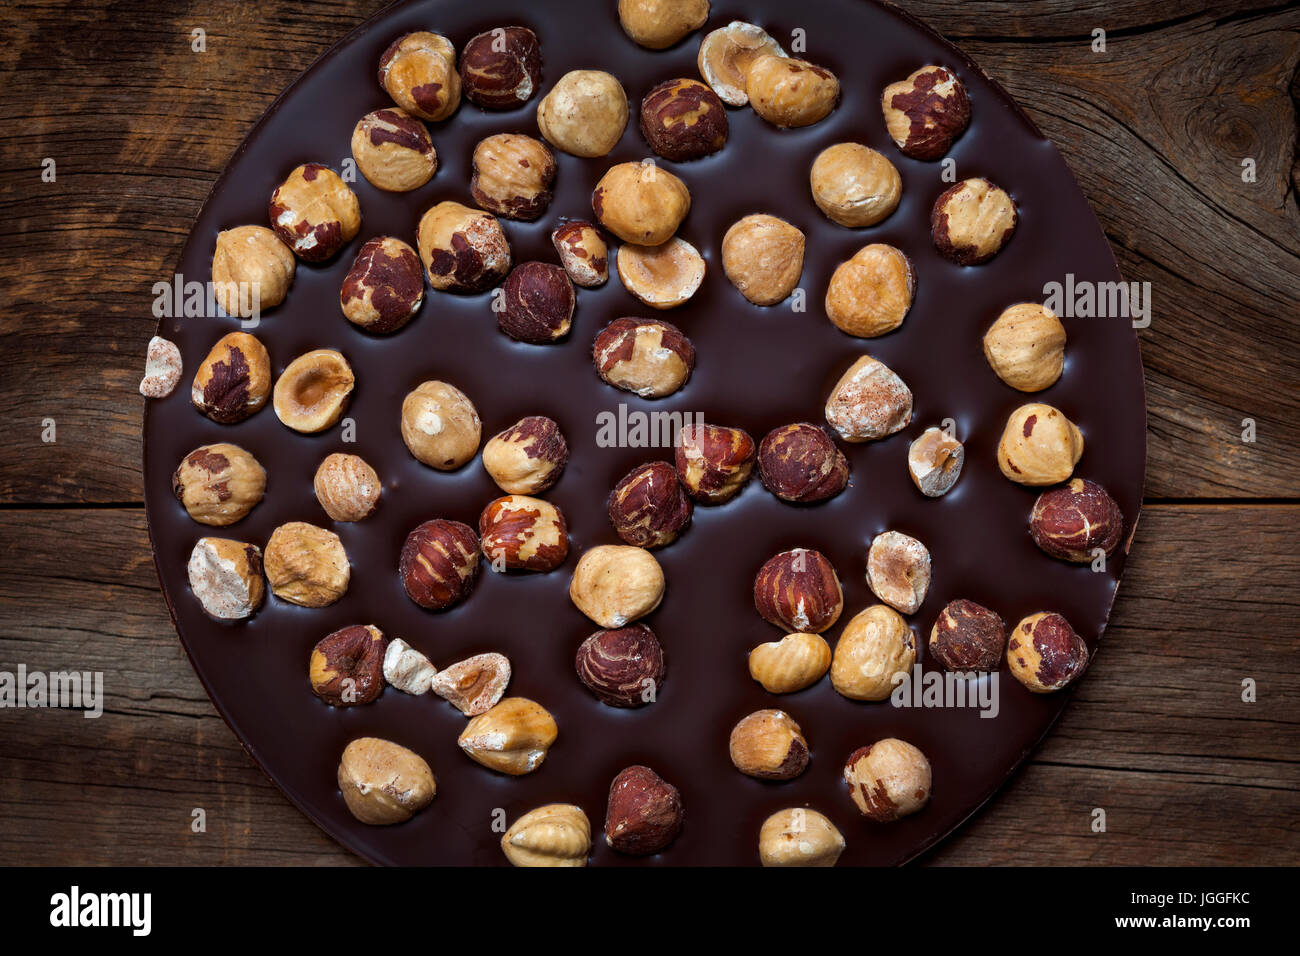 Round artisanal dark chocolate bar with whole hazelnuts on rustic wood background, overhead view Stock Photo